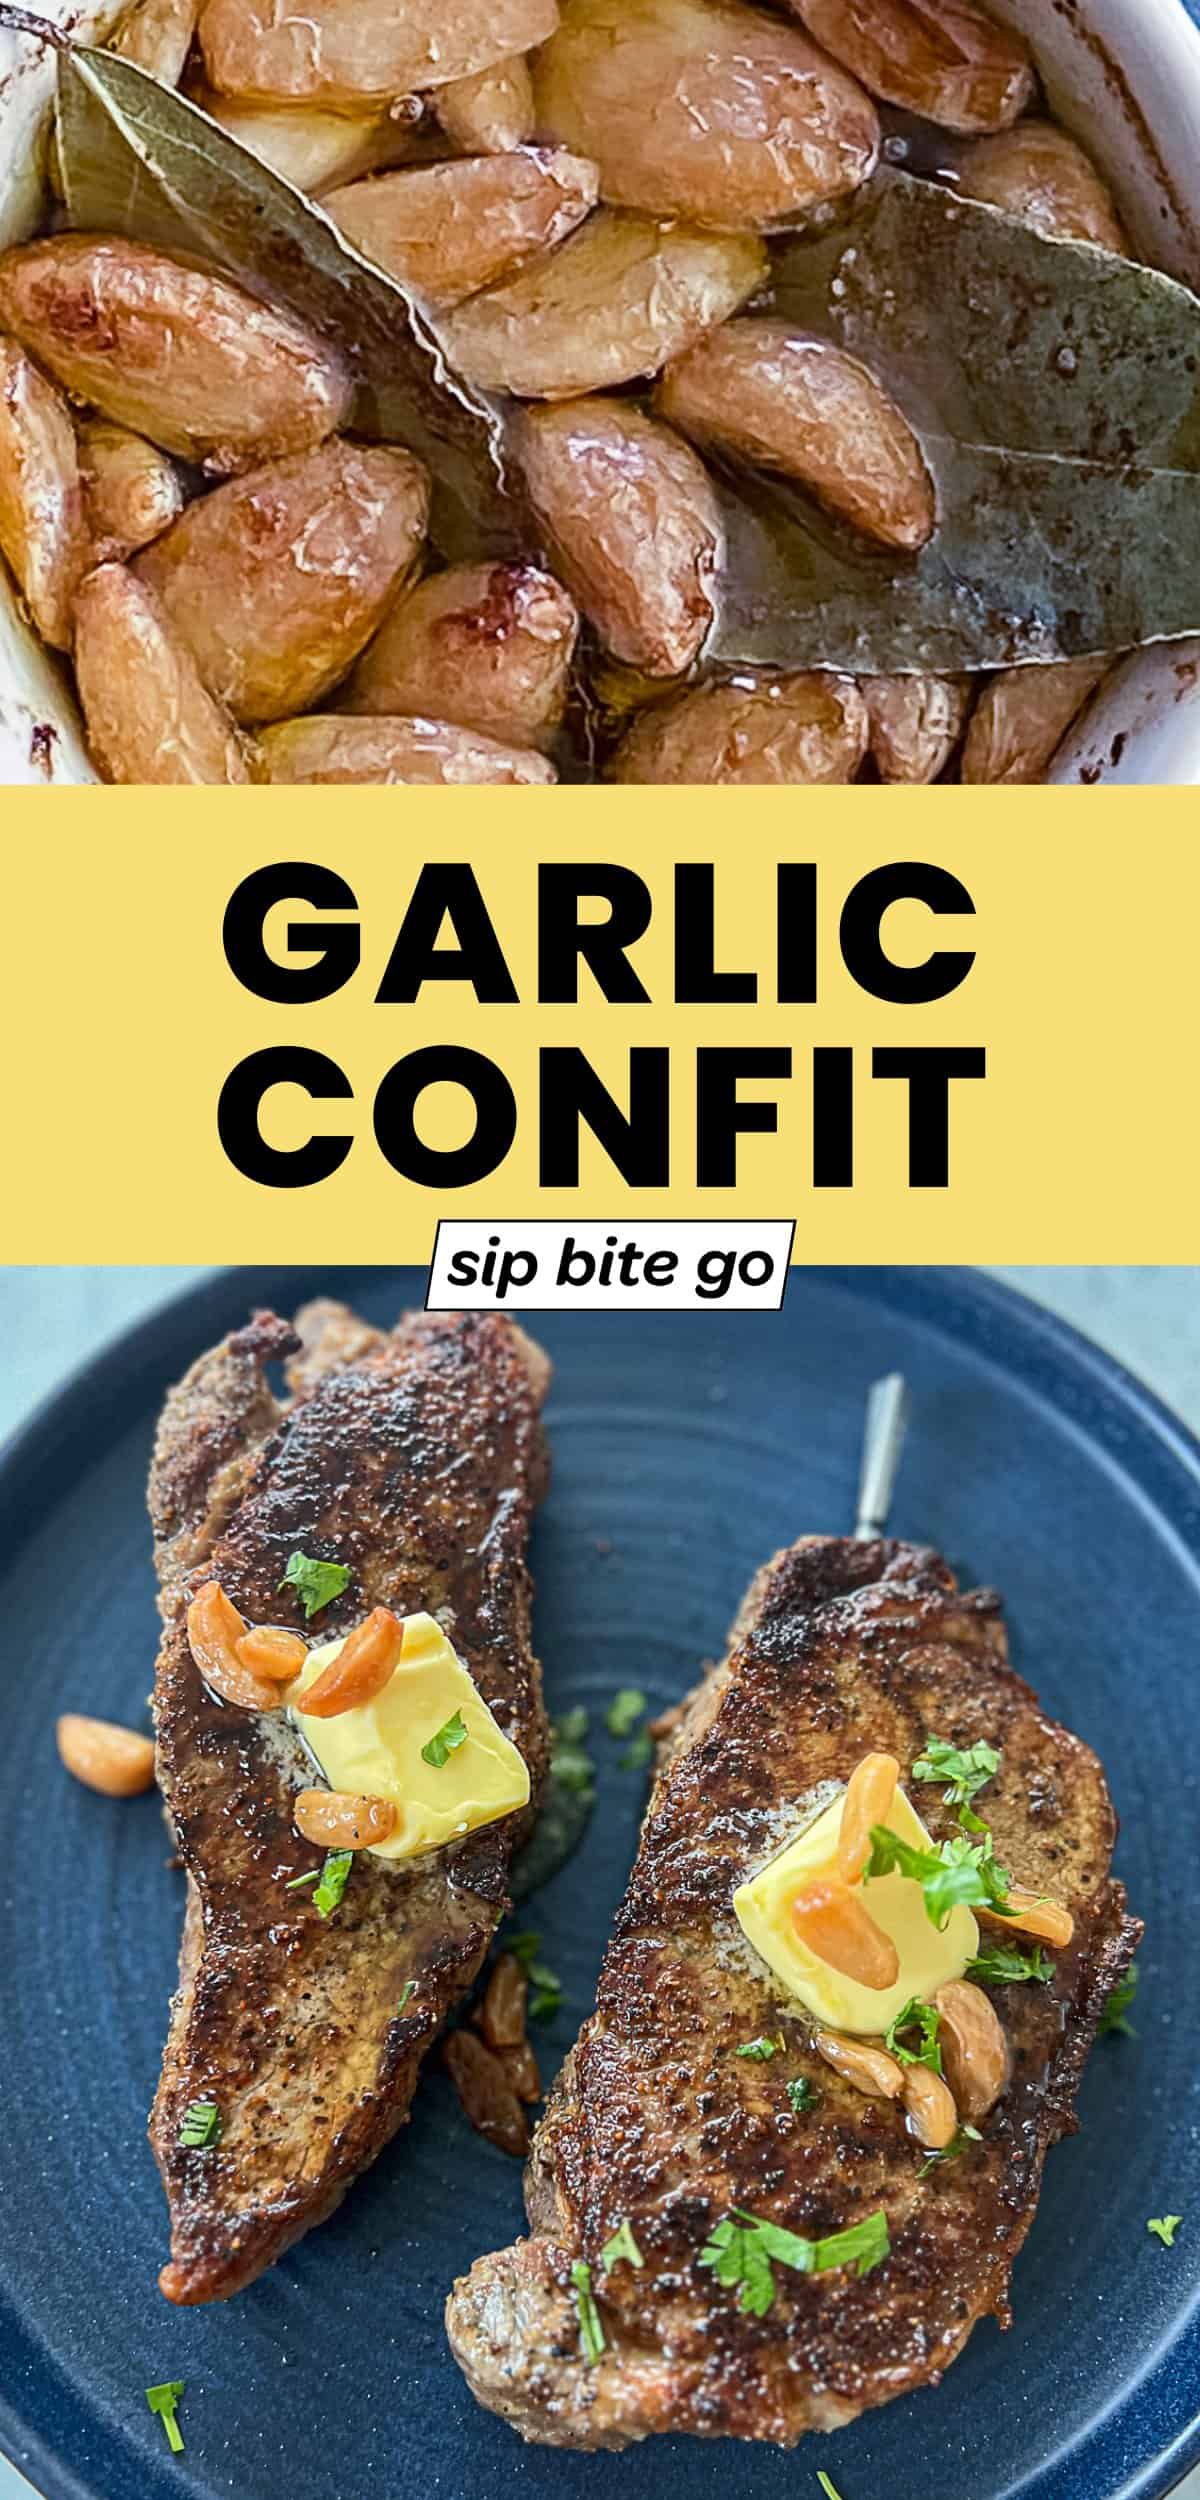 Garlic Confit Recipe with text overlay